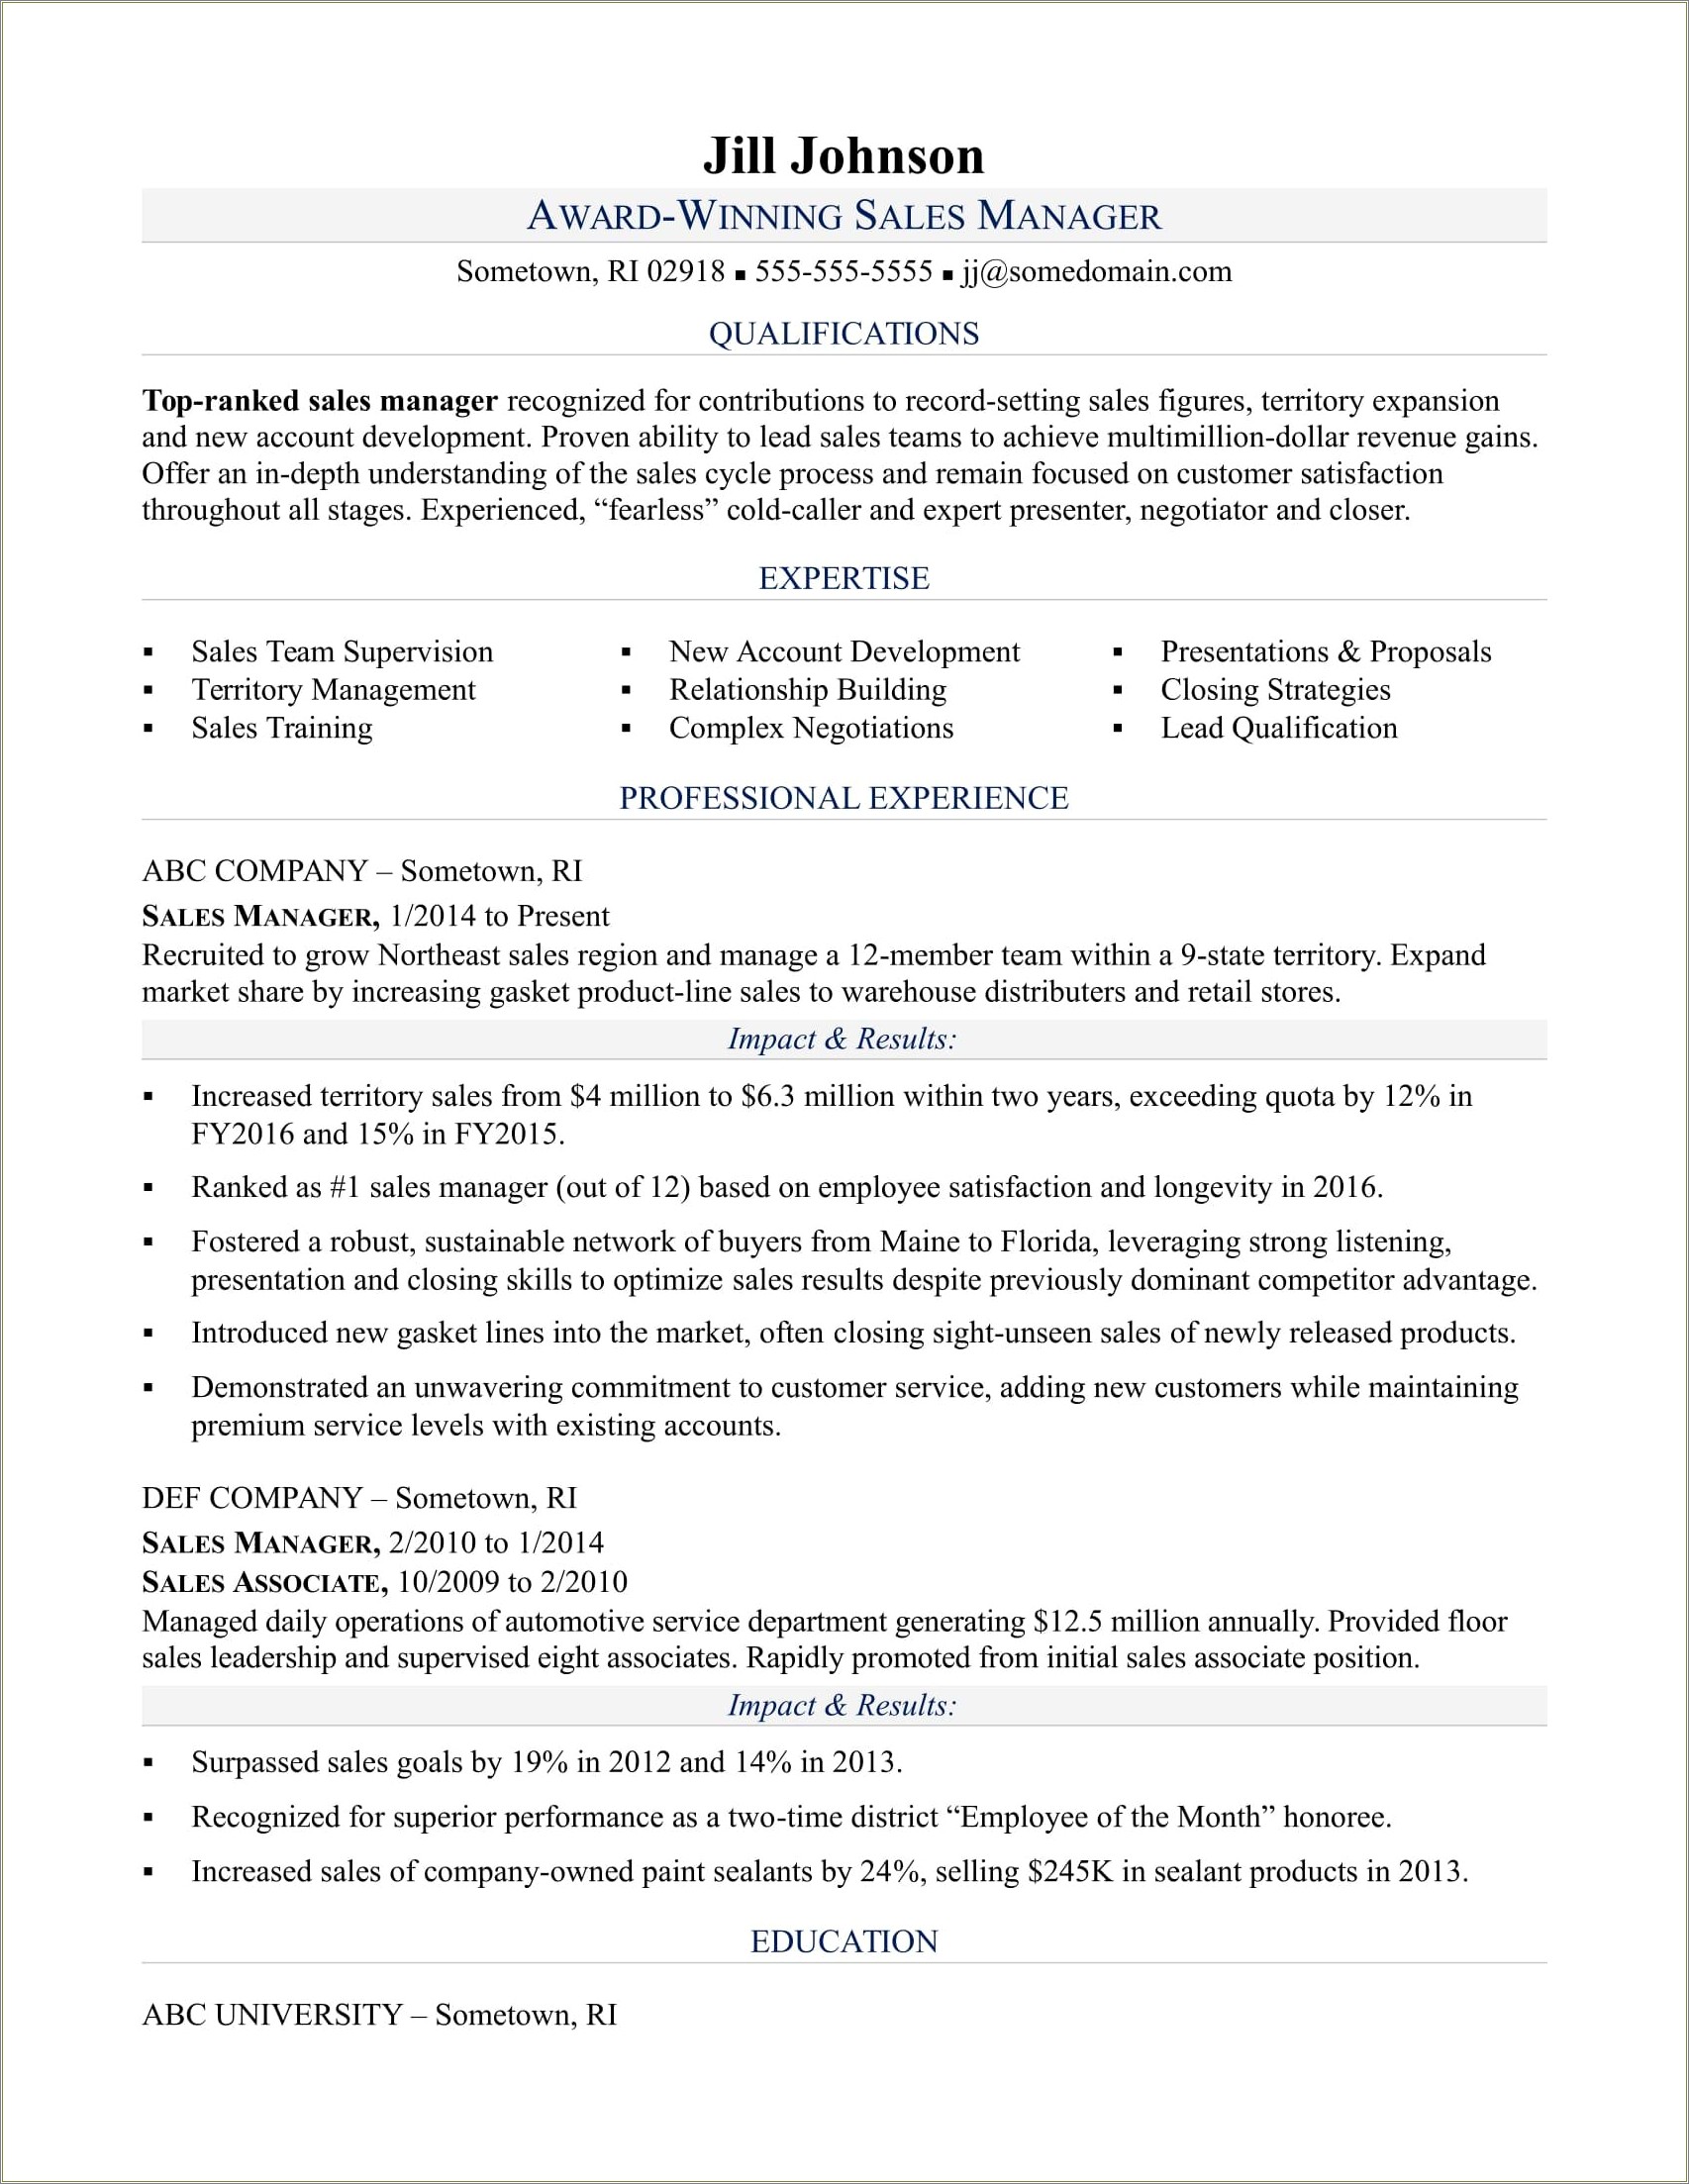 Sample Resume For Head Of Department